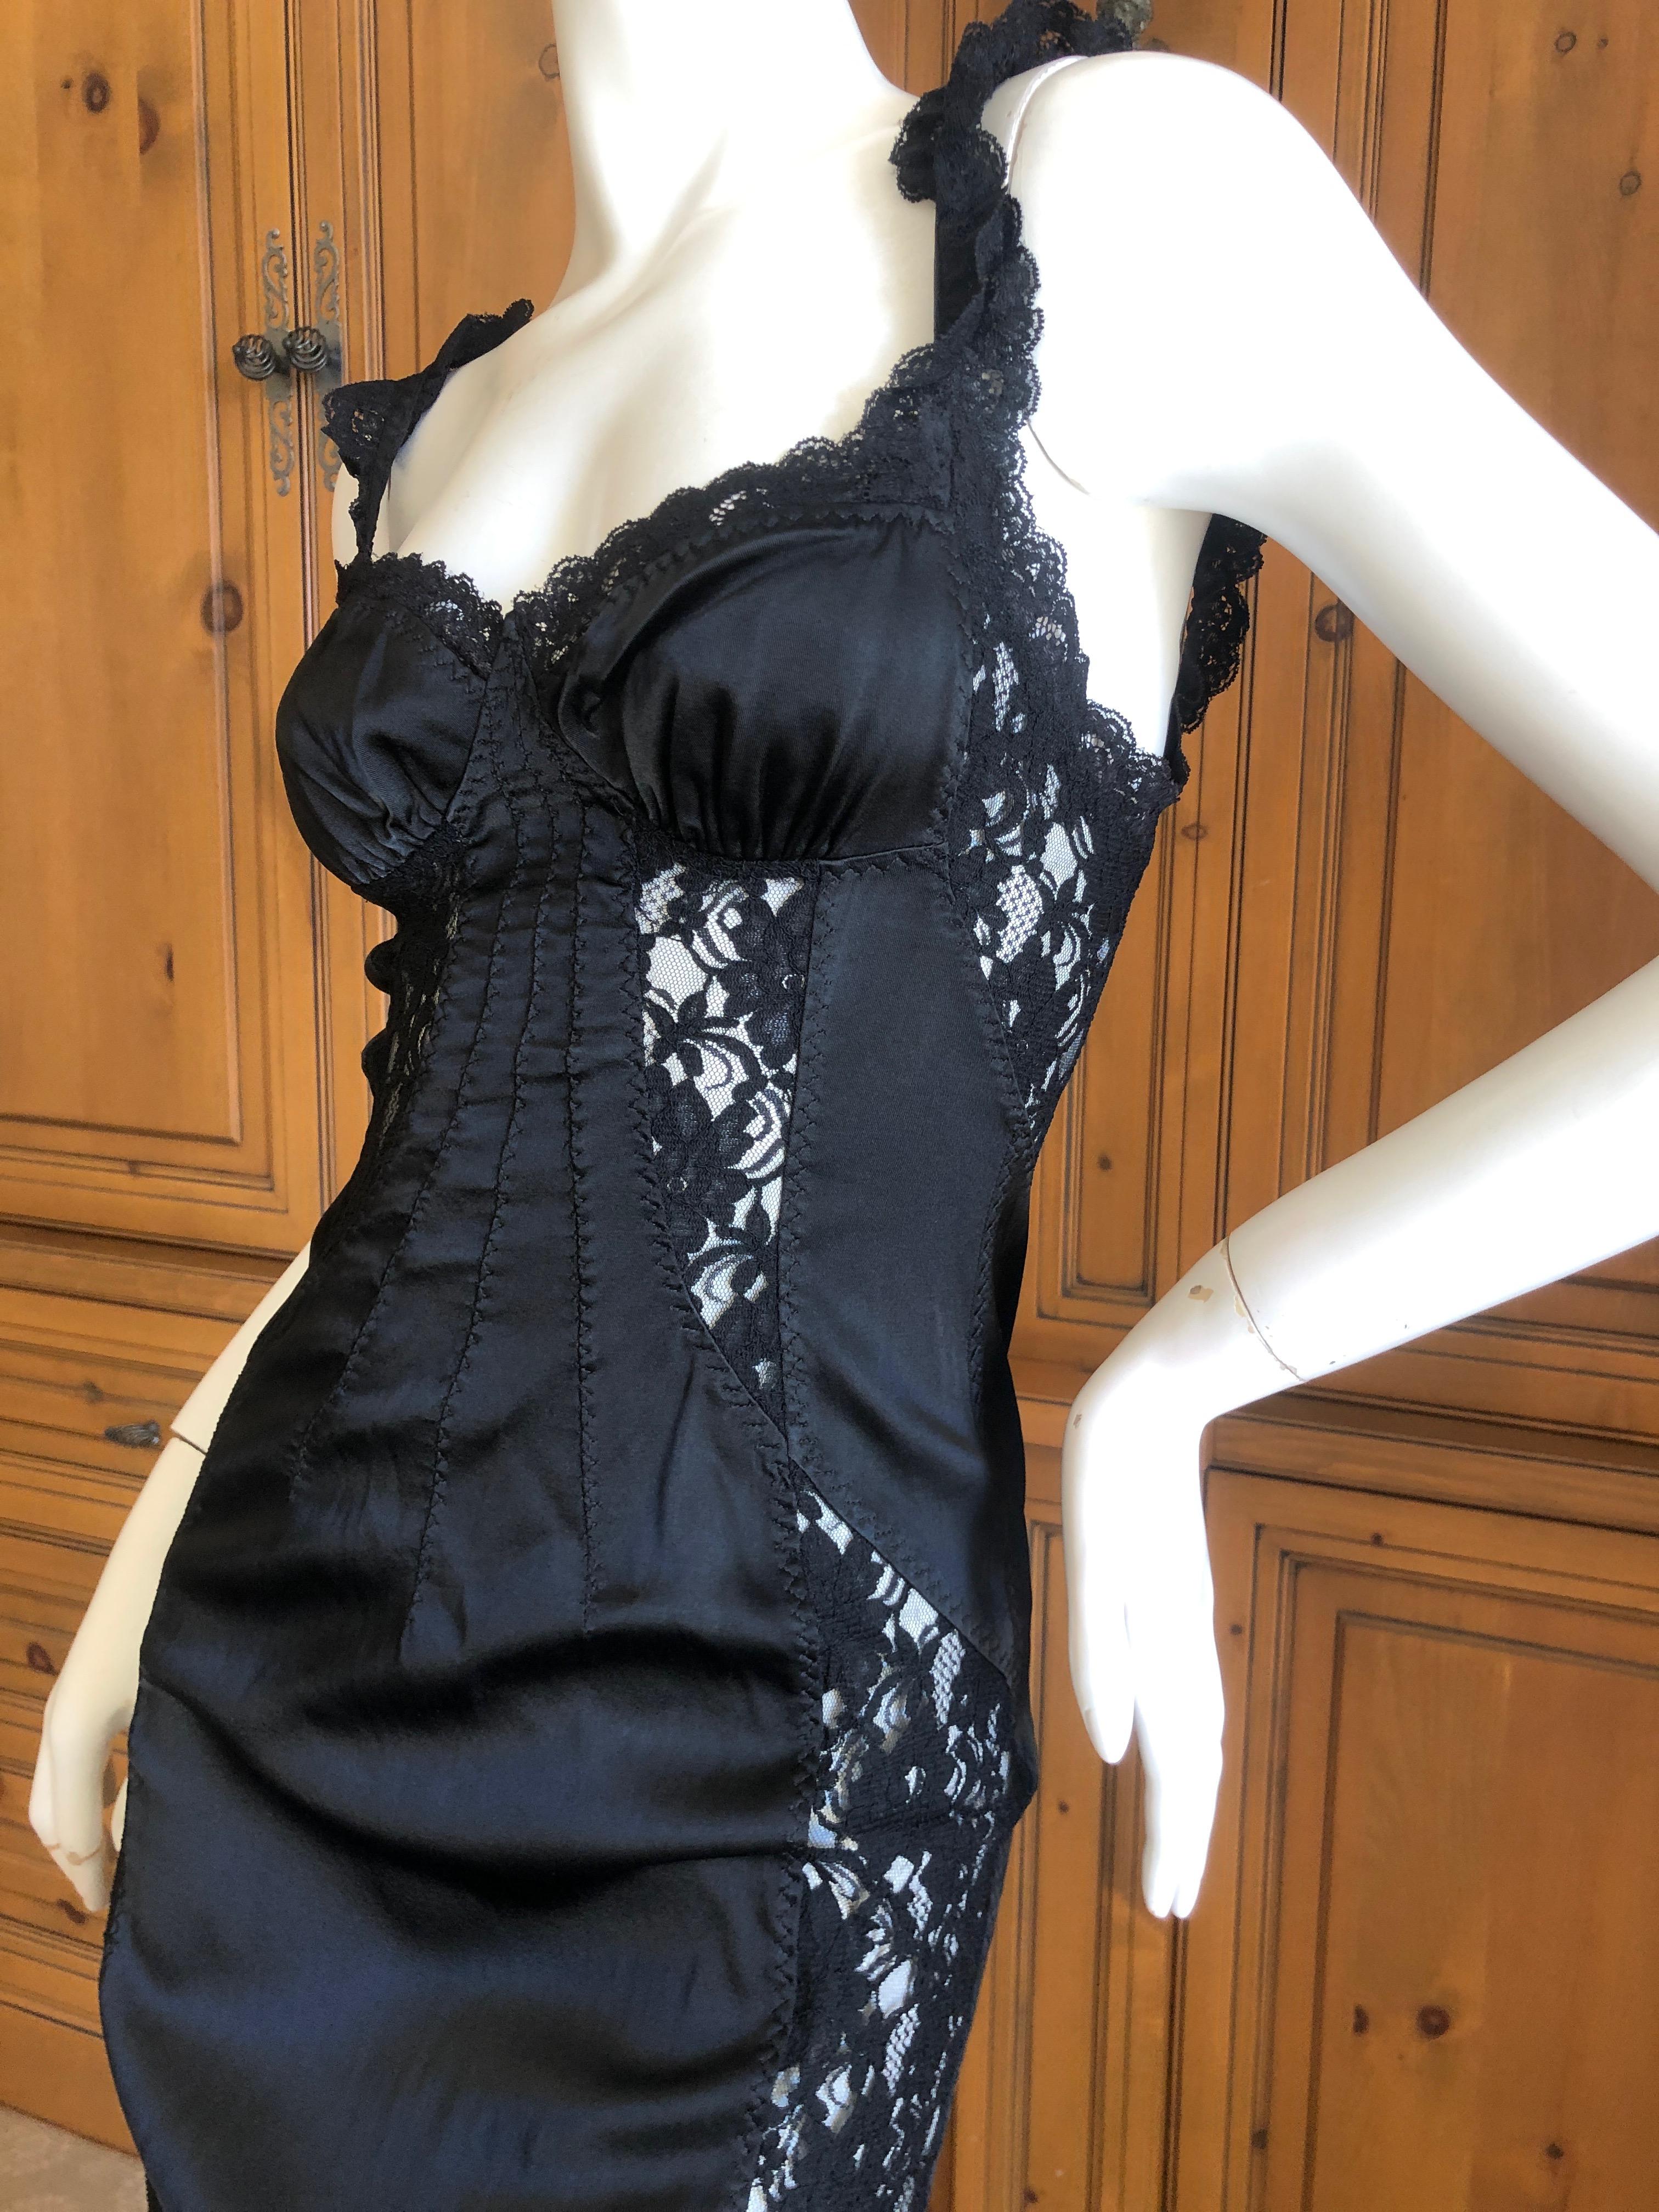 D&G Dolce & Gabbana Vintage Little Black Dress with Lace Inserts In Excellent Condition For Sale In Cloverdale, CA